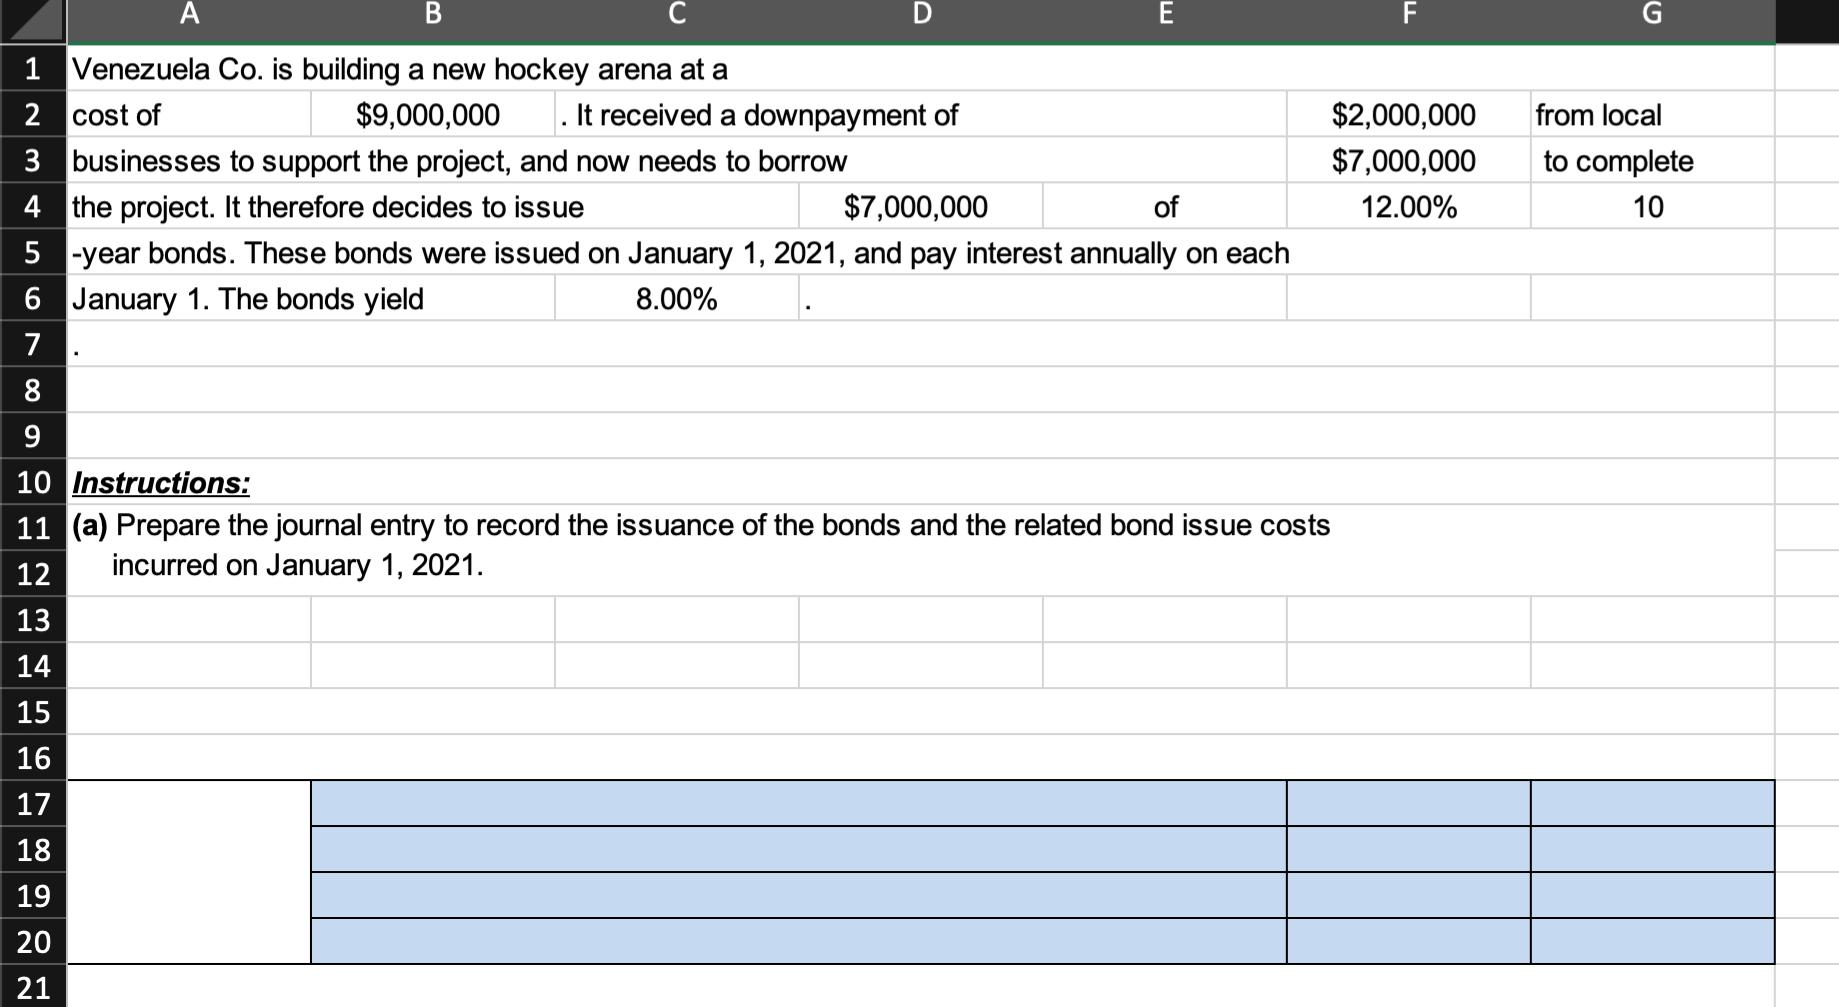 A BC Venezuela Co. is building a new hockey arena at a \begin{tabular}{|l|l|c|c|c|c|} \hline 2 & cost of & \( \$ 9,000,000 \